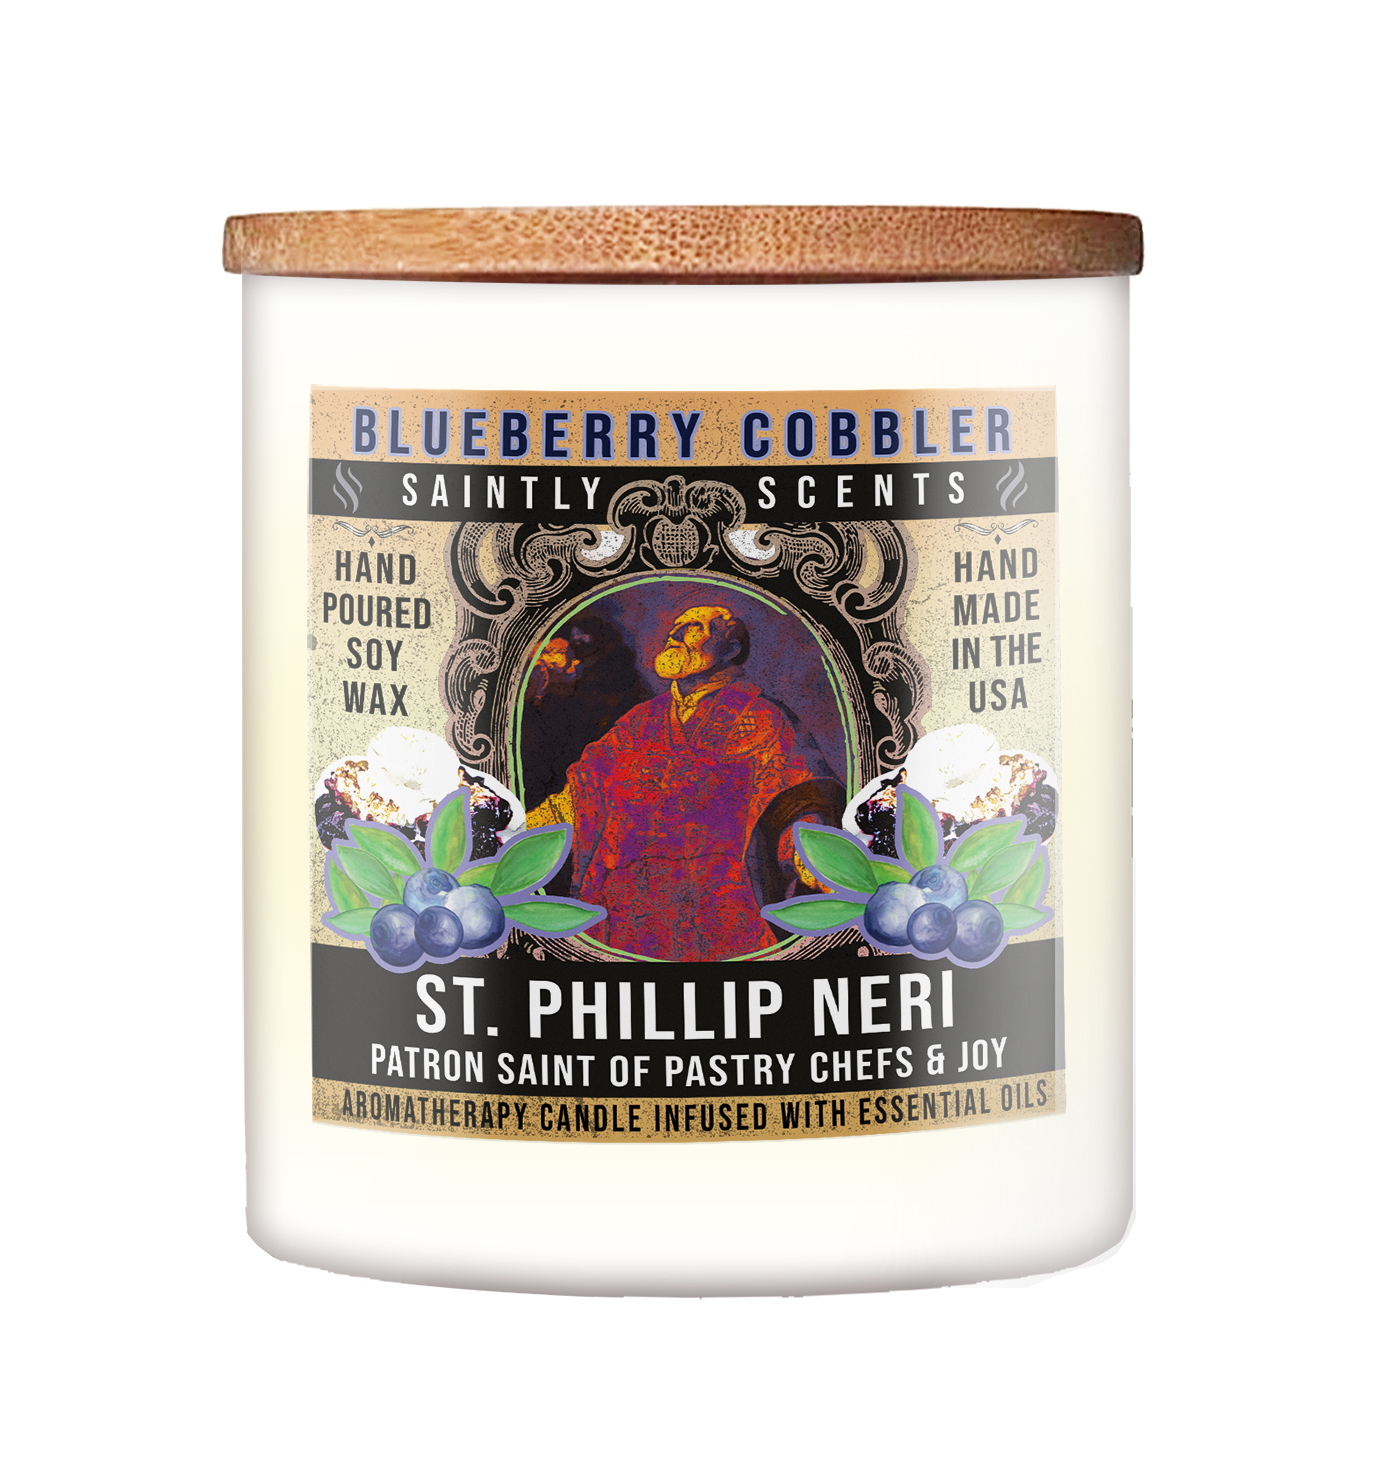 St. Phillip Neri Blueberry Cobbler Scented Candle